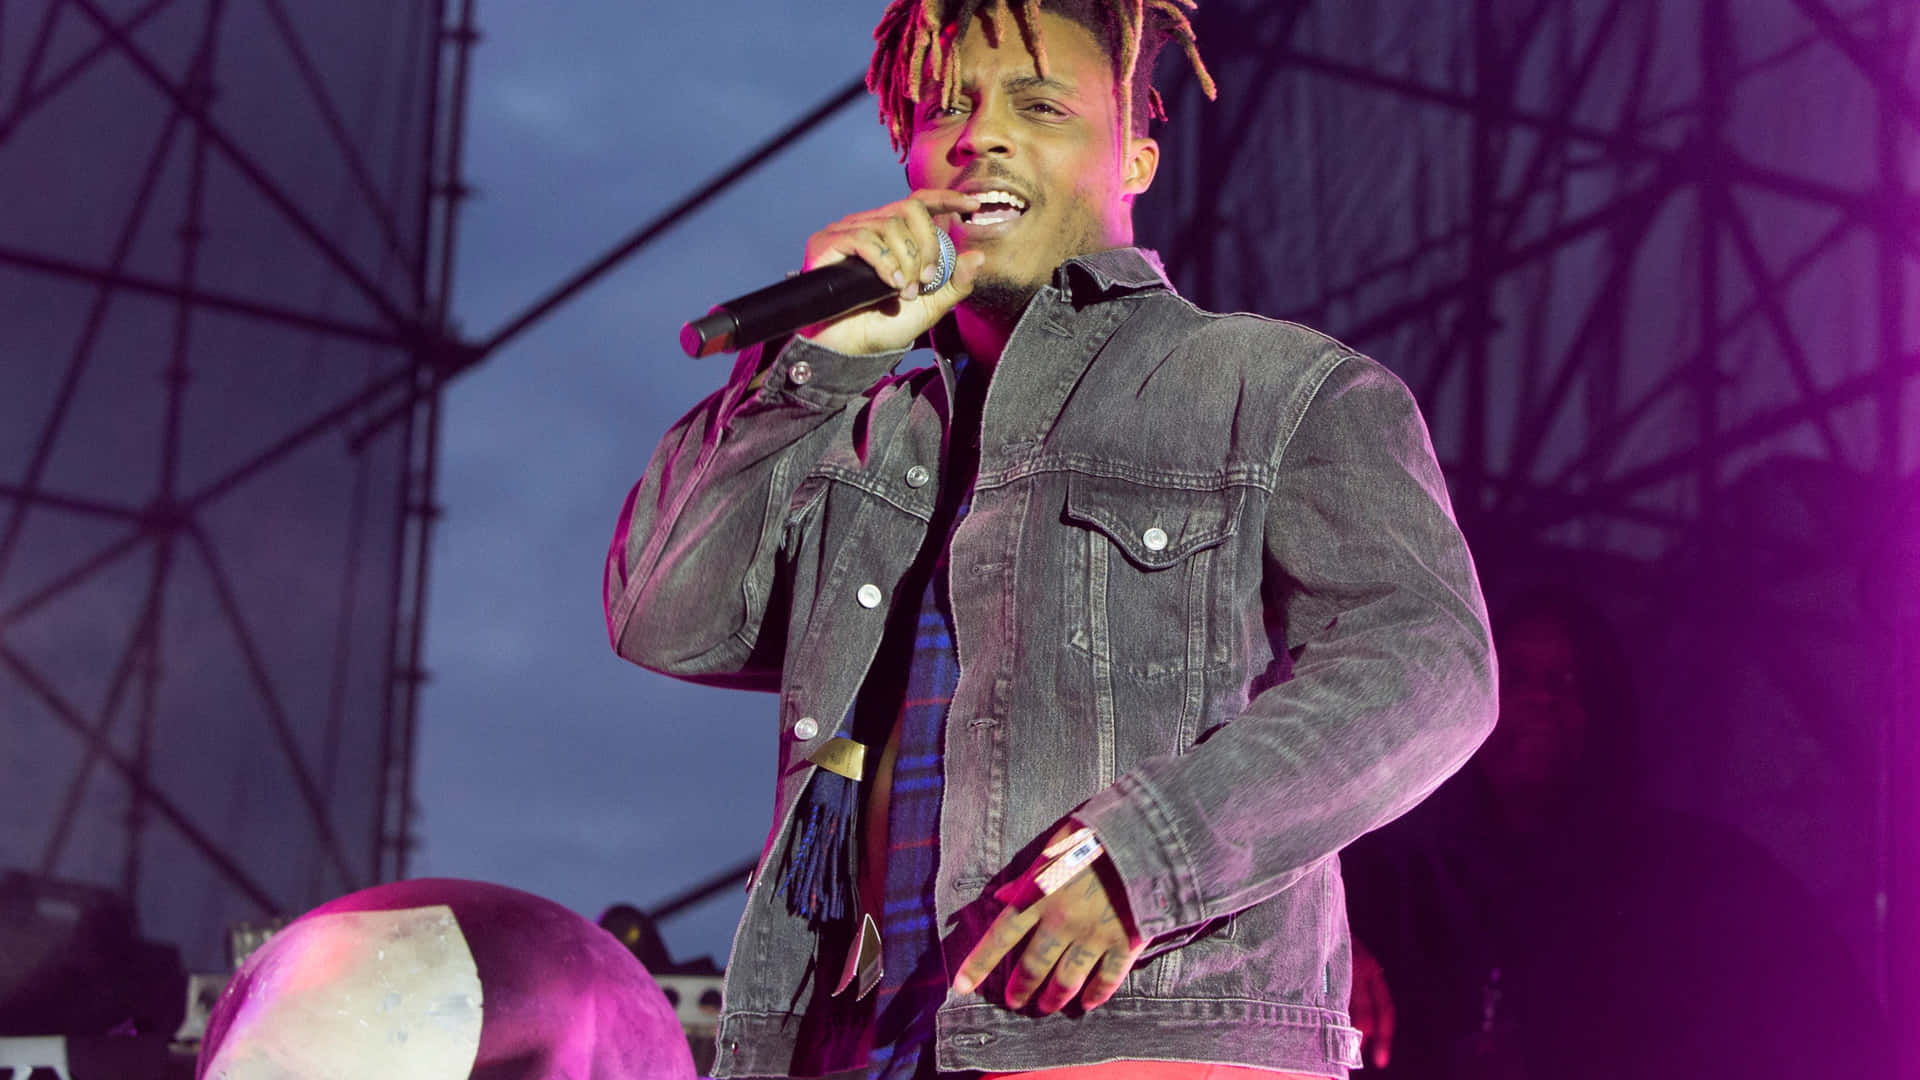 Juice Wrld electrifies the stage with his energetic performance Wallpaper